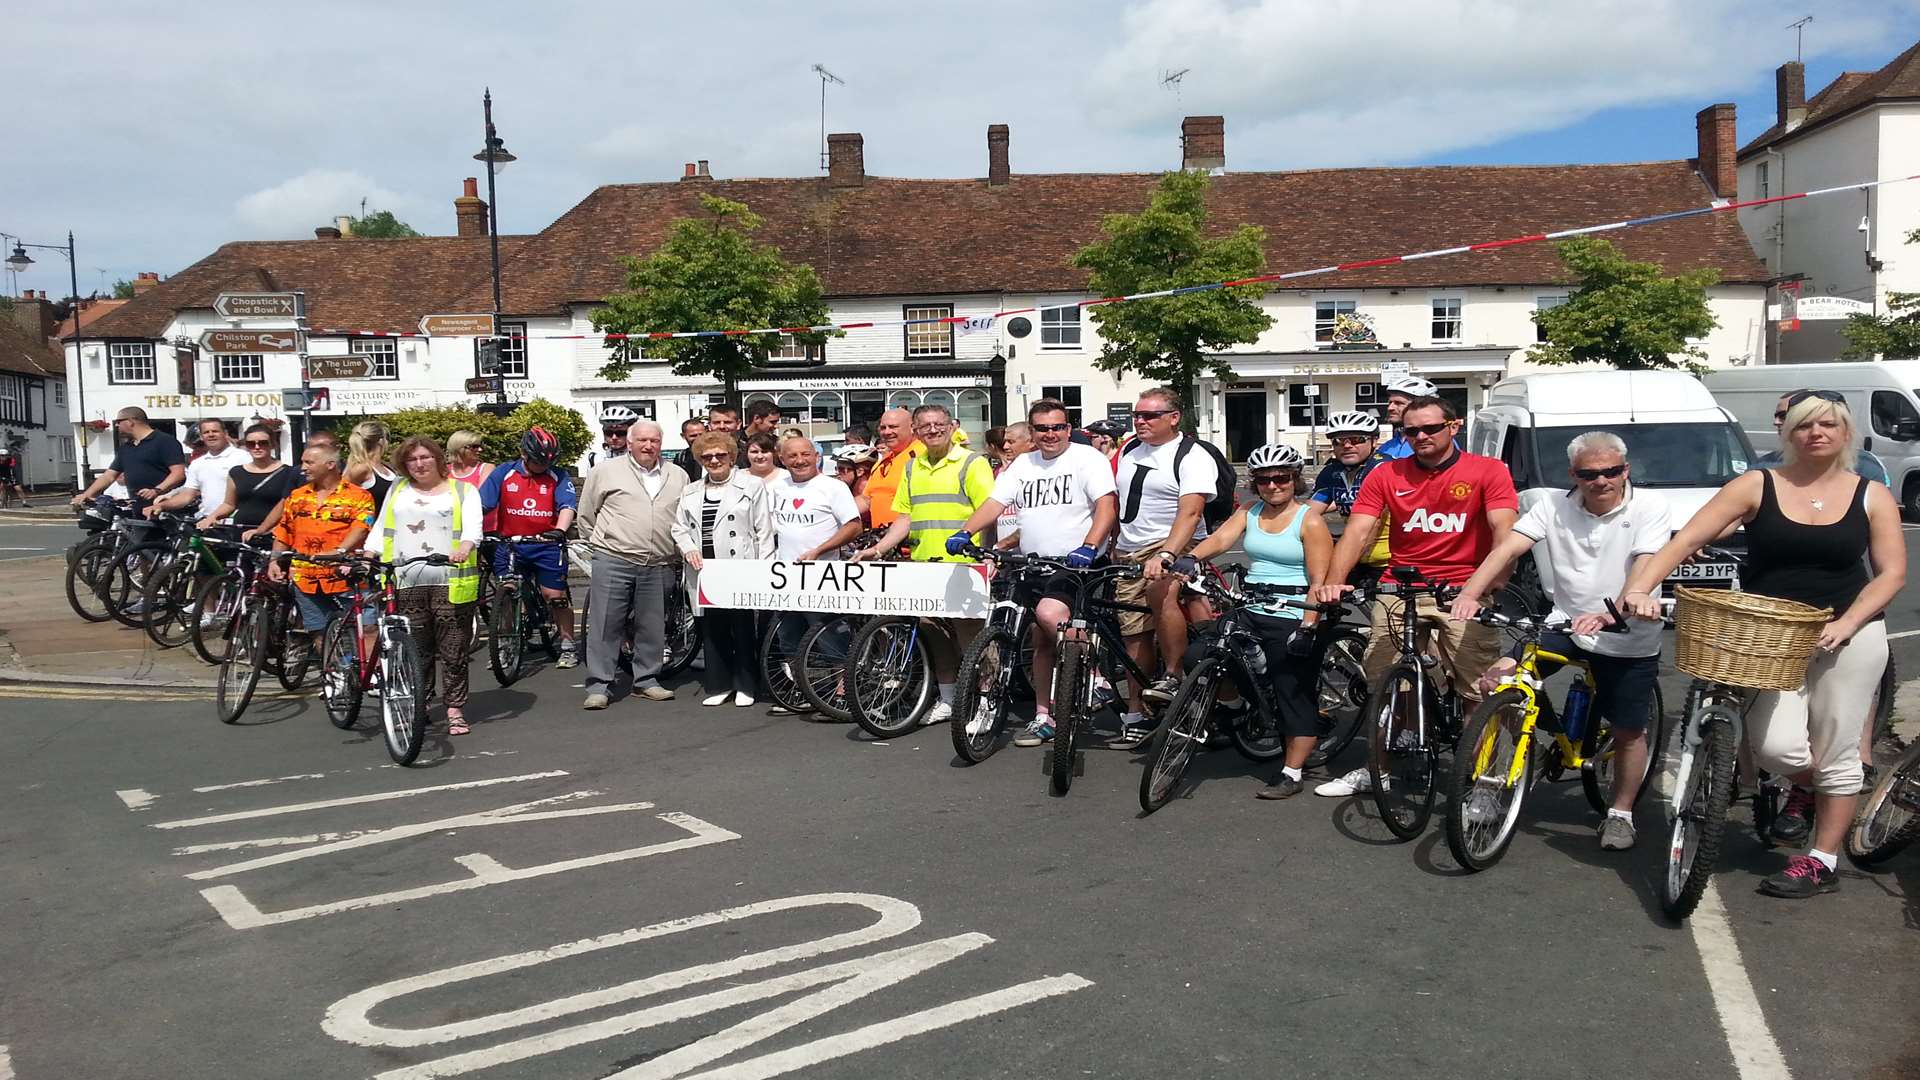 The cyclists will start and finish in Lenham